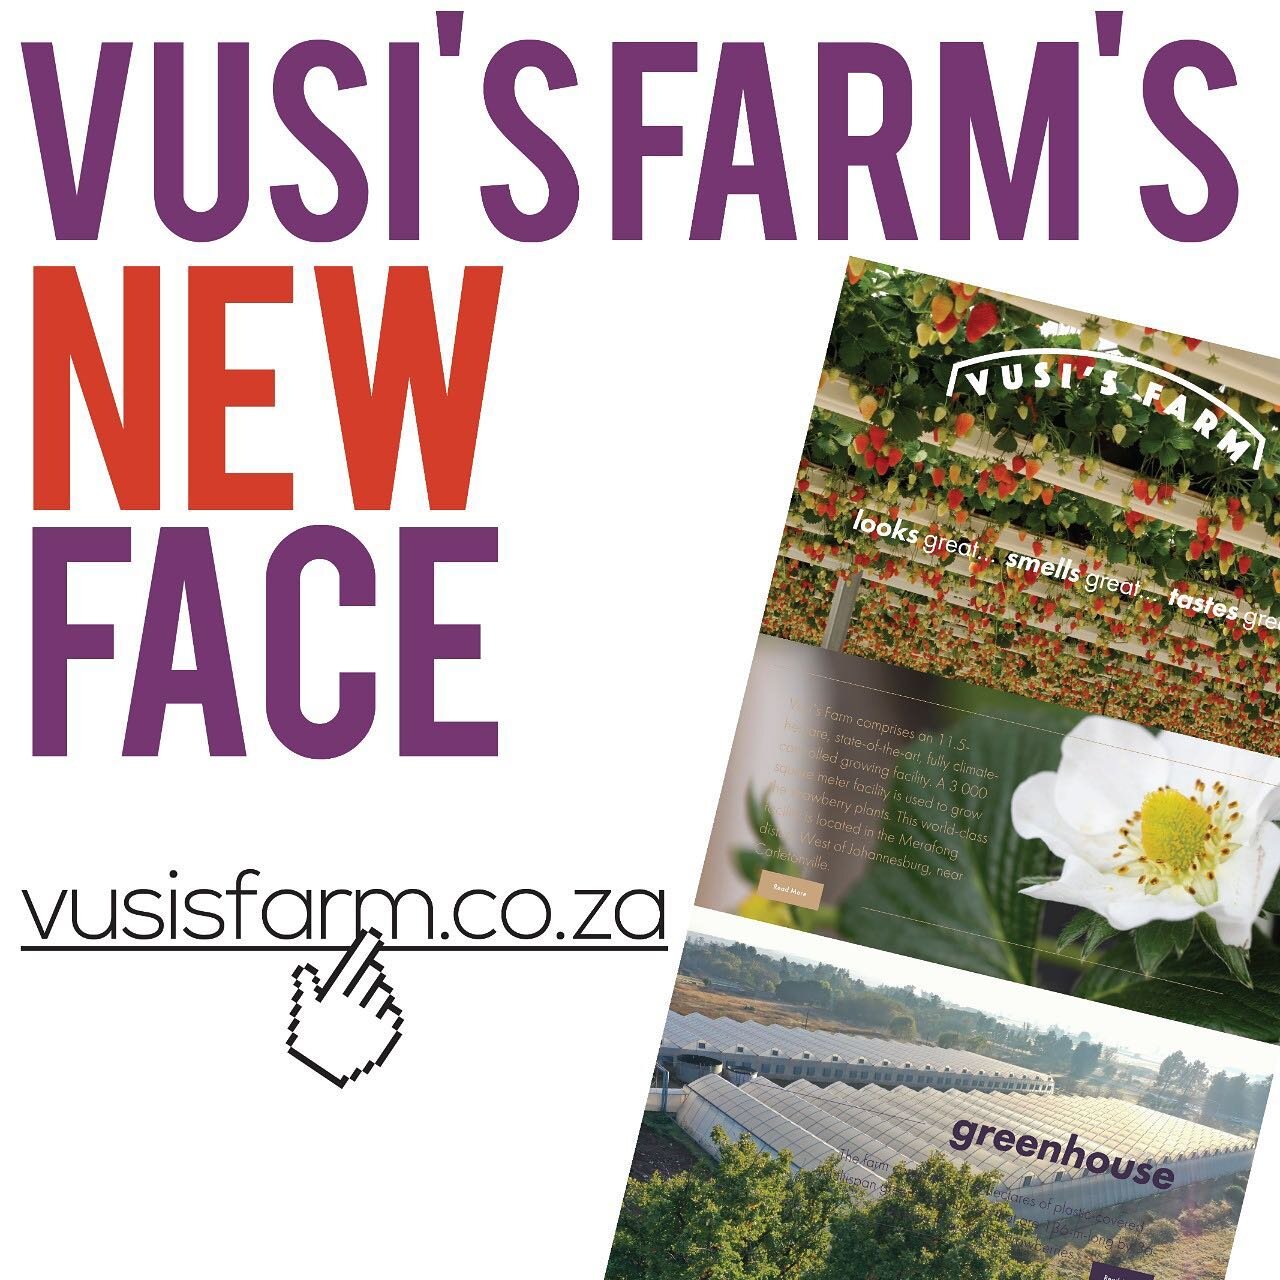 Our new #vusisfarm website is now live. Check out all the new functionalities, improved ease of use and latest product offerings. Click the link in bio